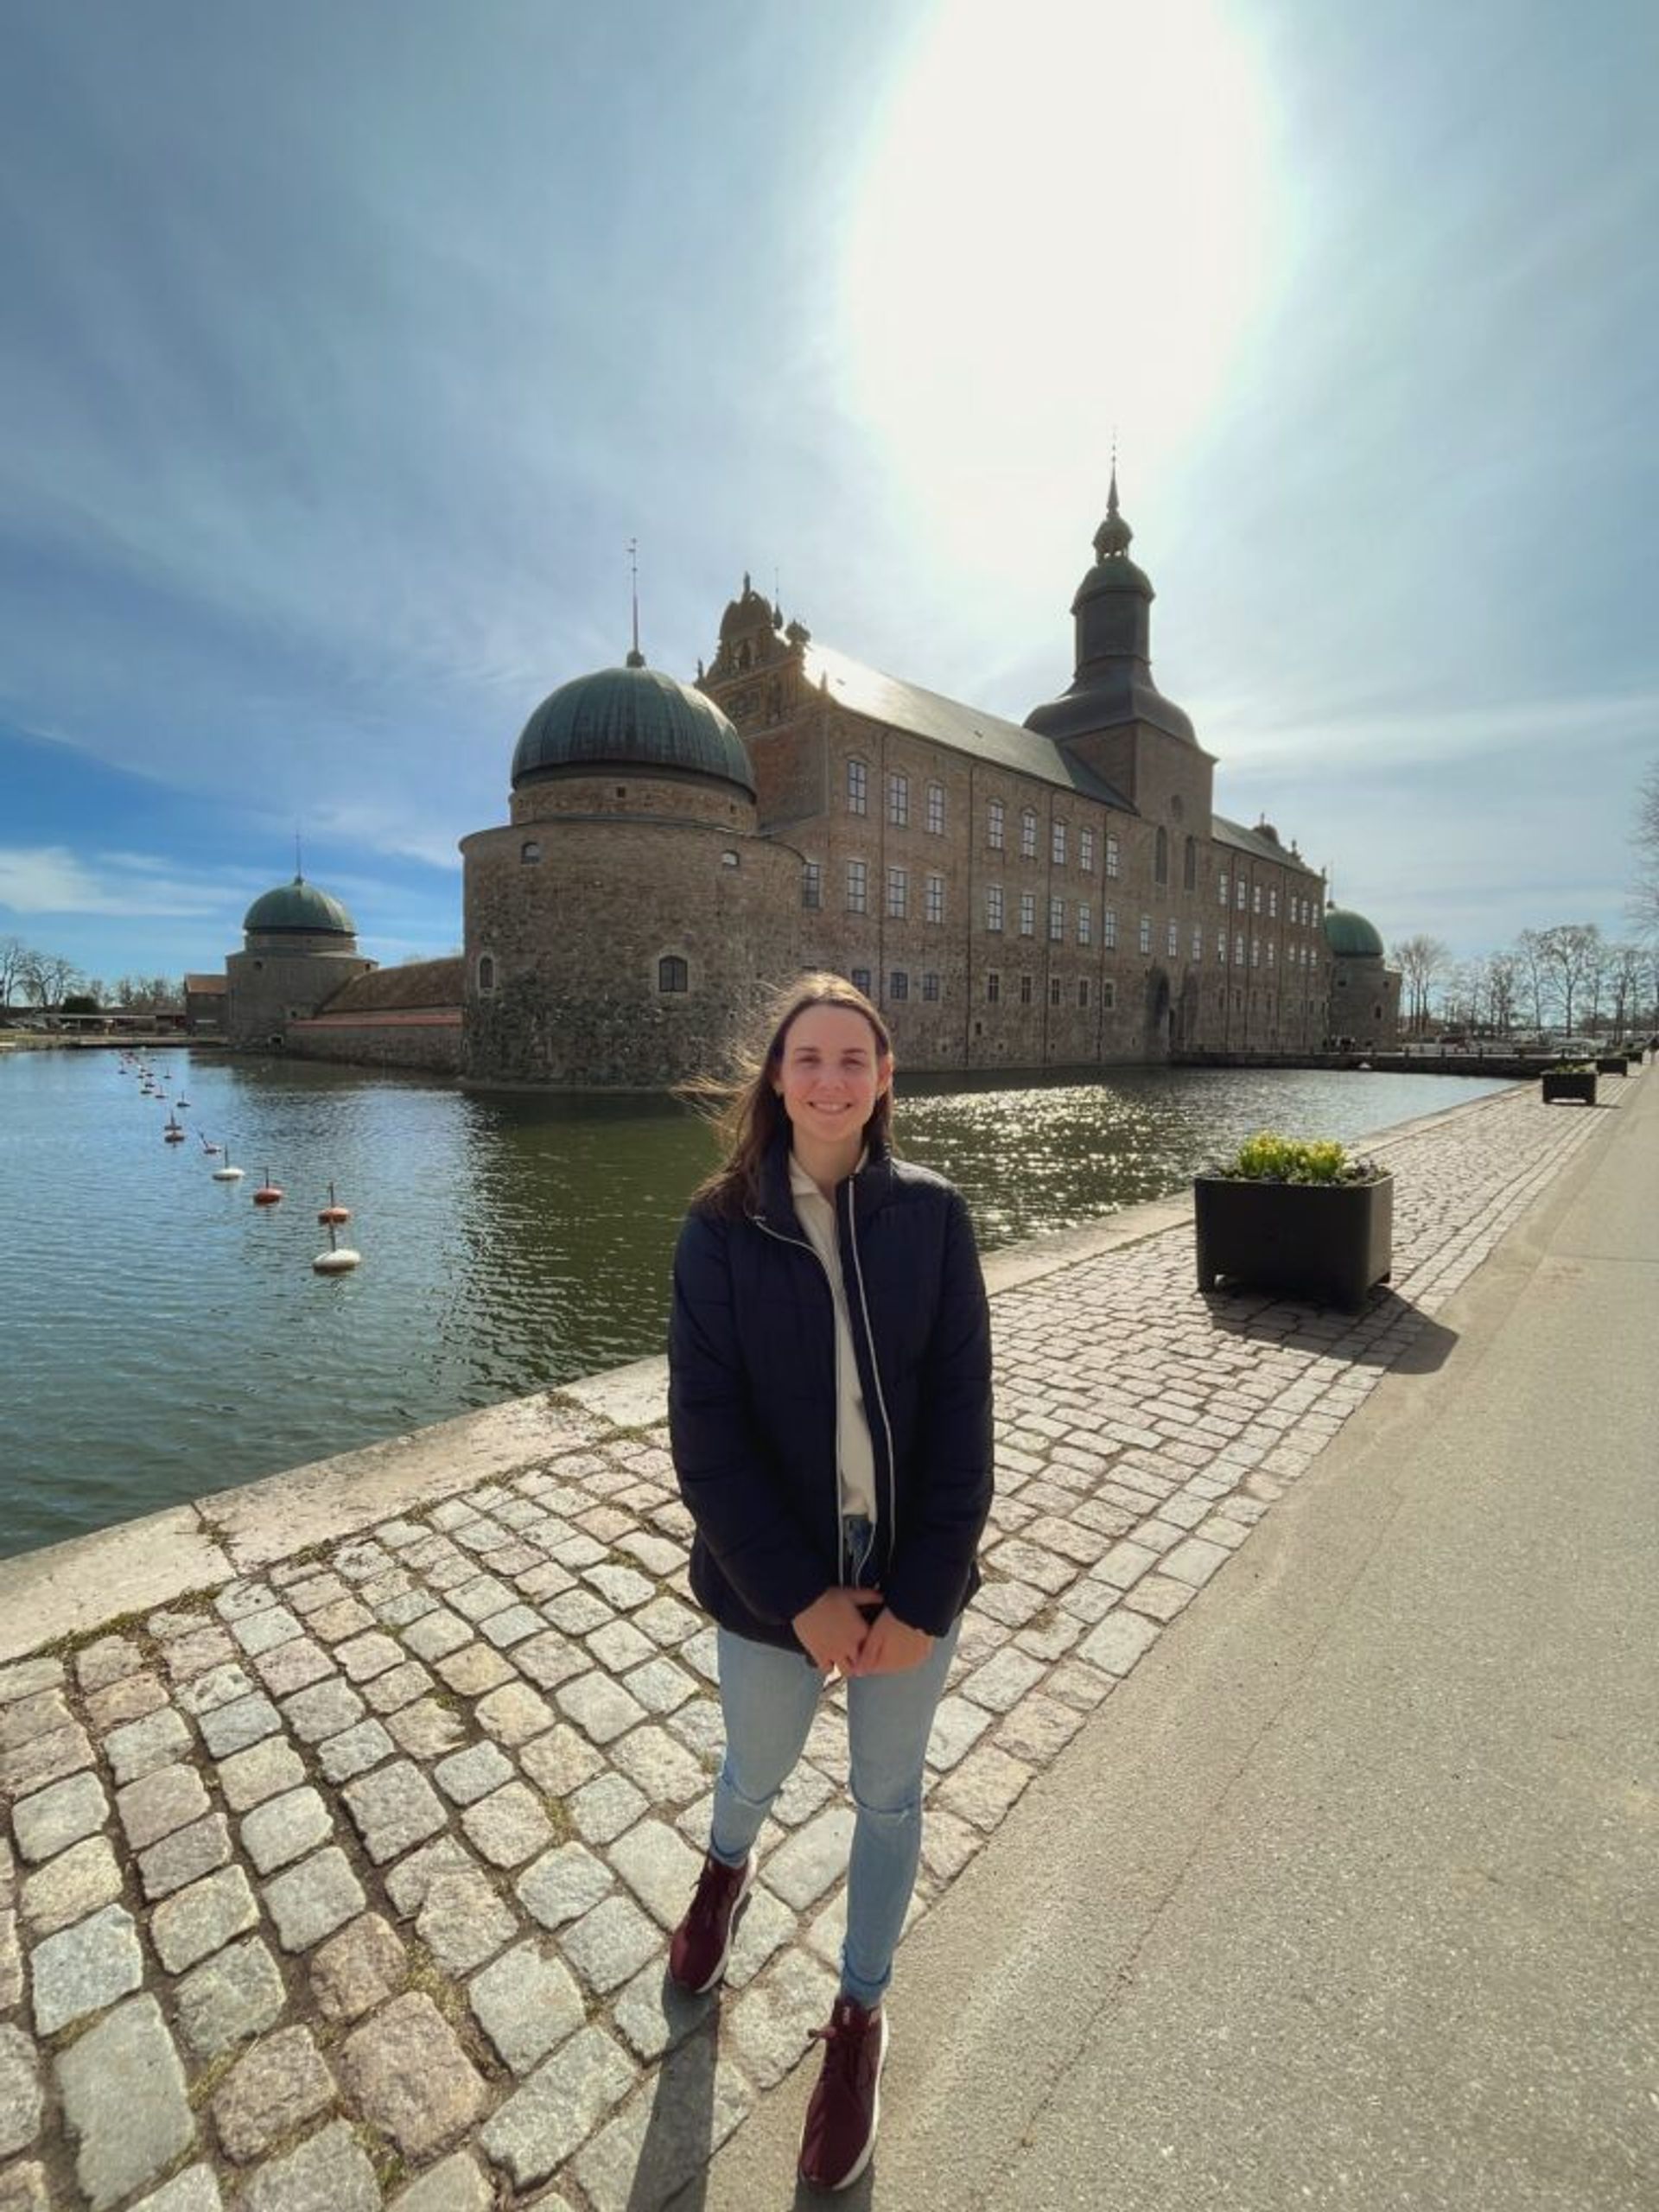 A girl standing in front of a castle.